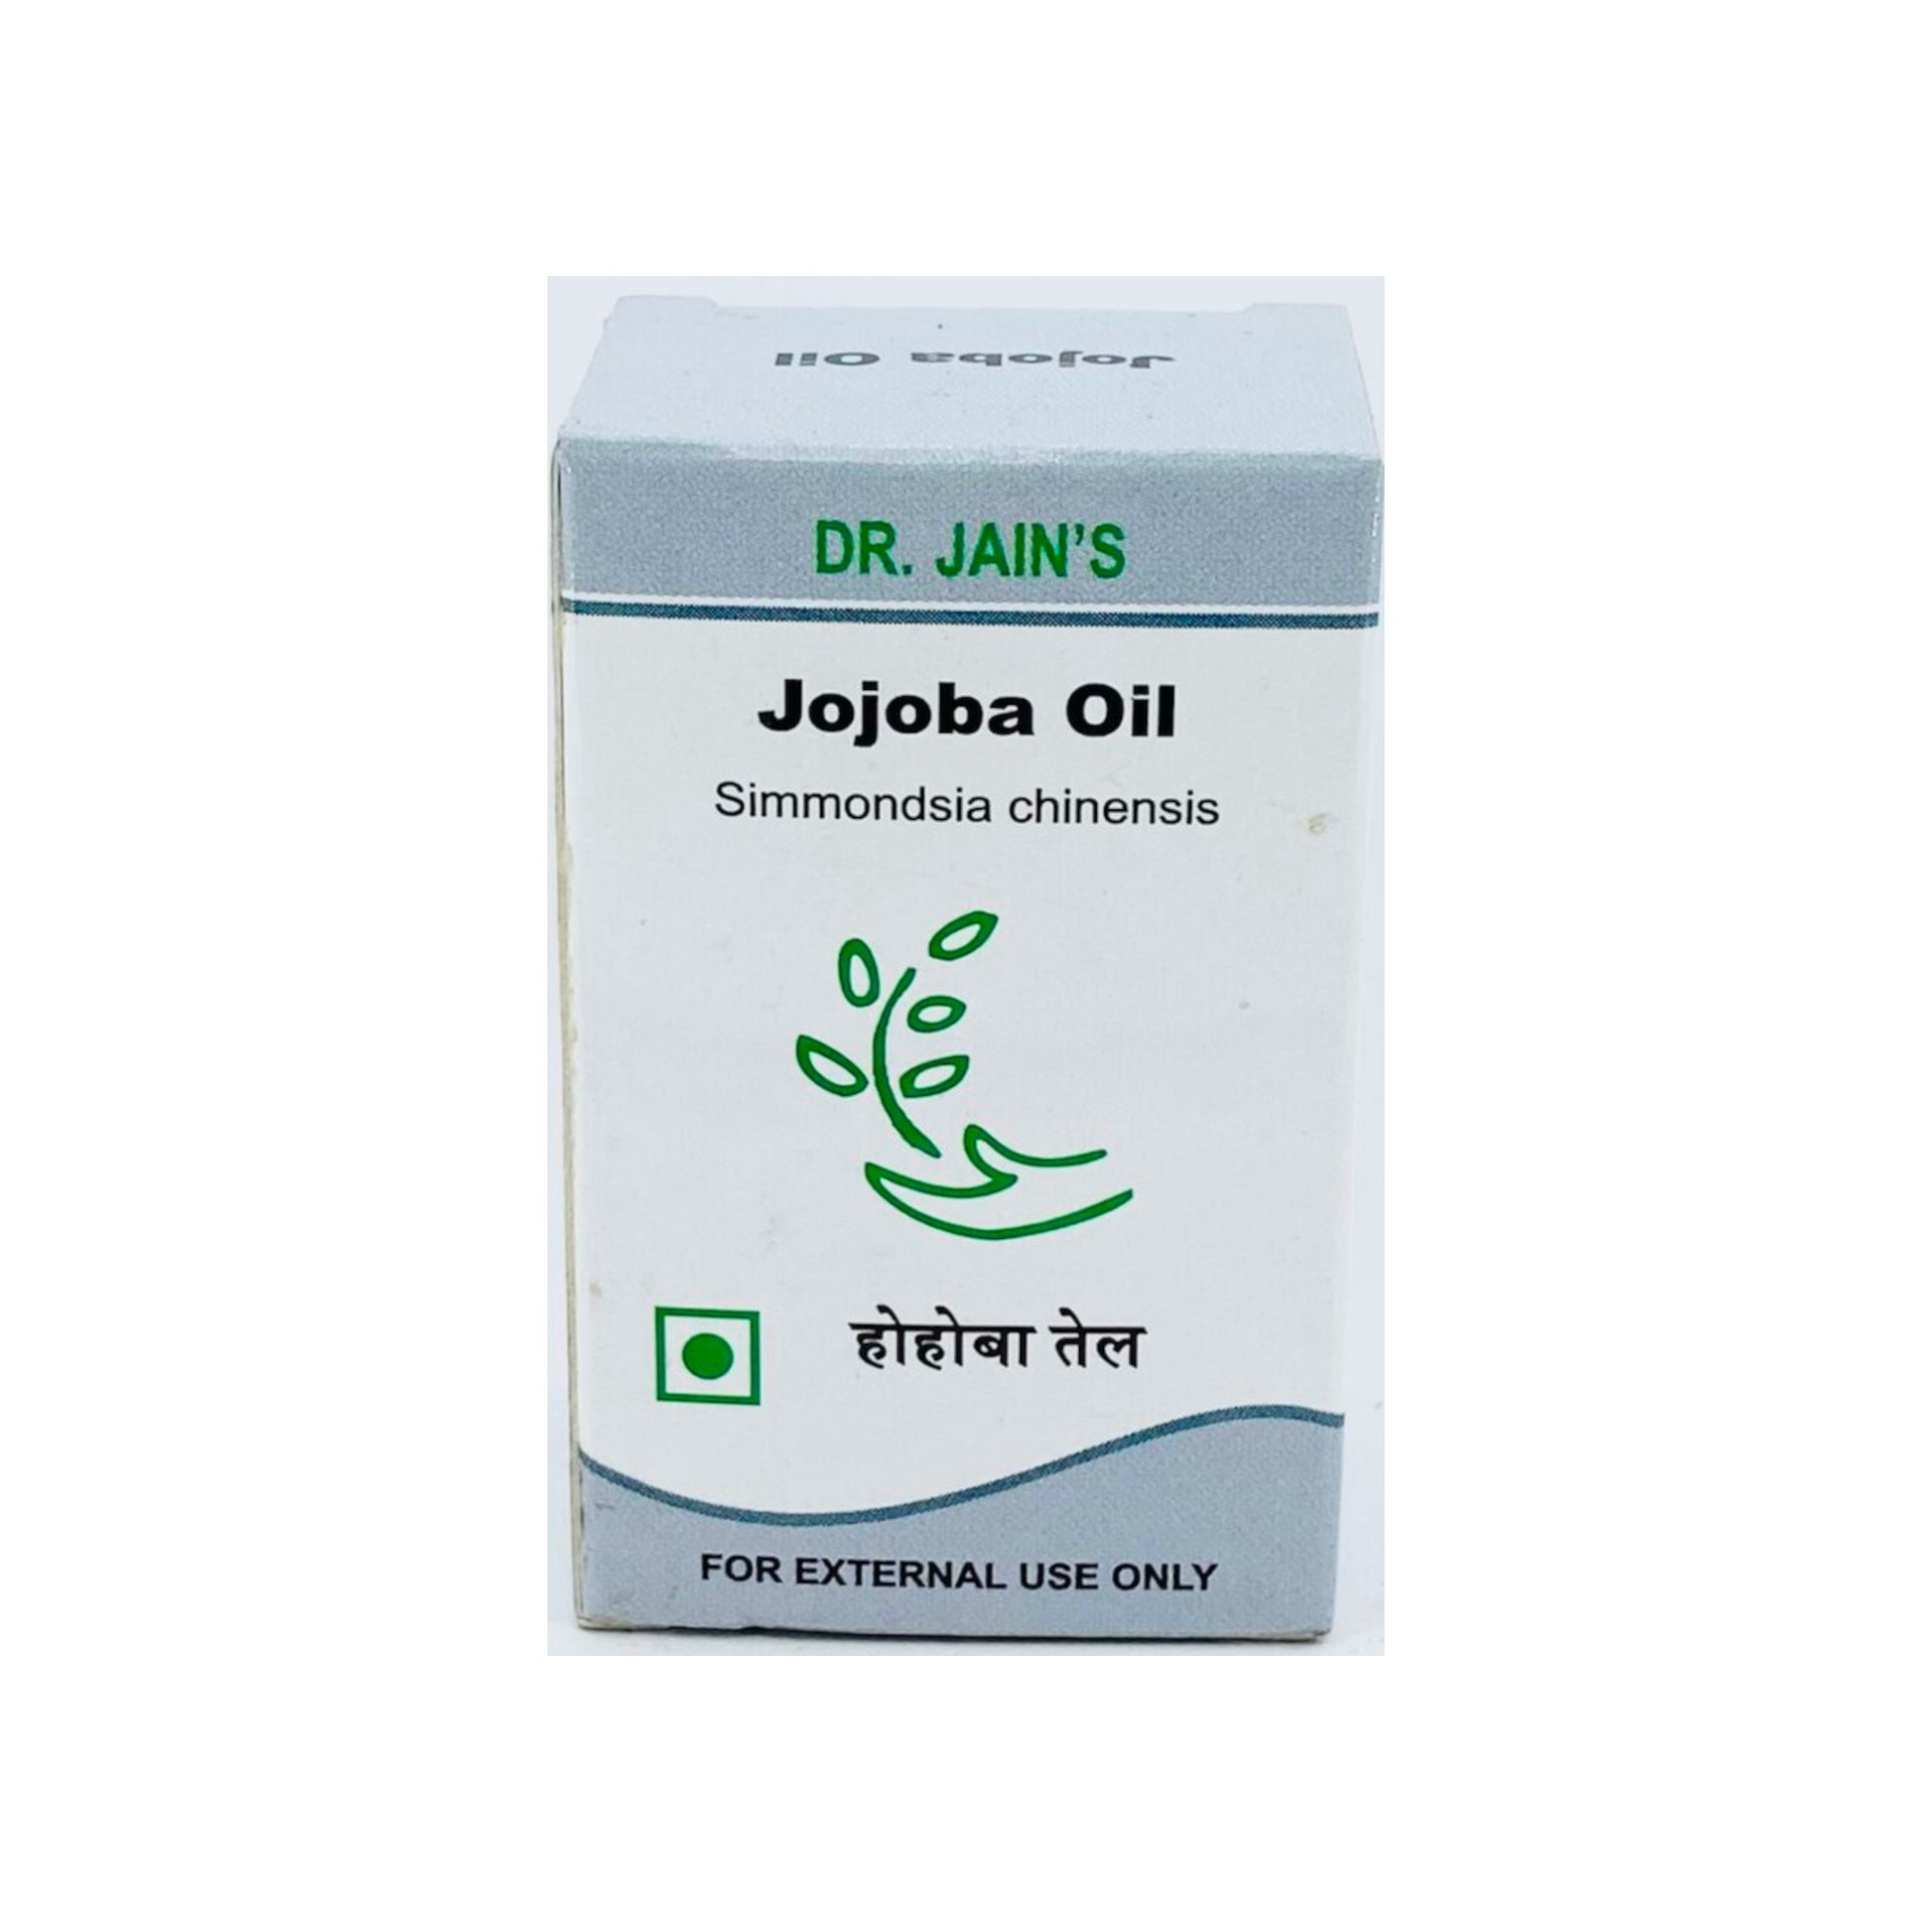 Dr. Jain's Jojoba Oil - 10 ml. A versatile and stable liquid. Useful for skincare, haircare, and more."